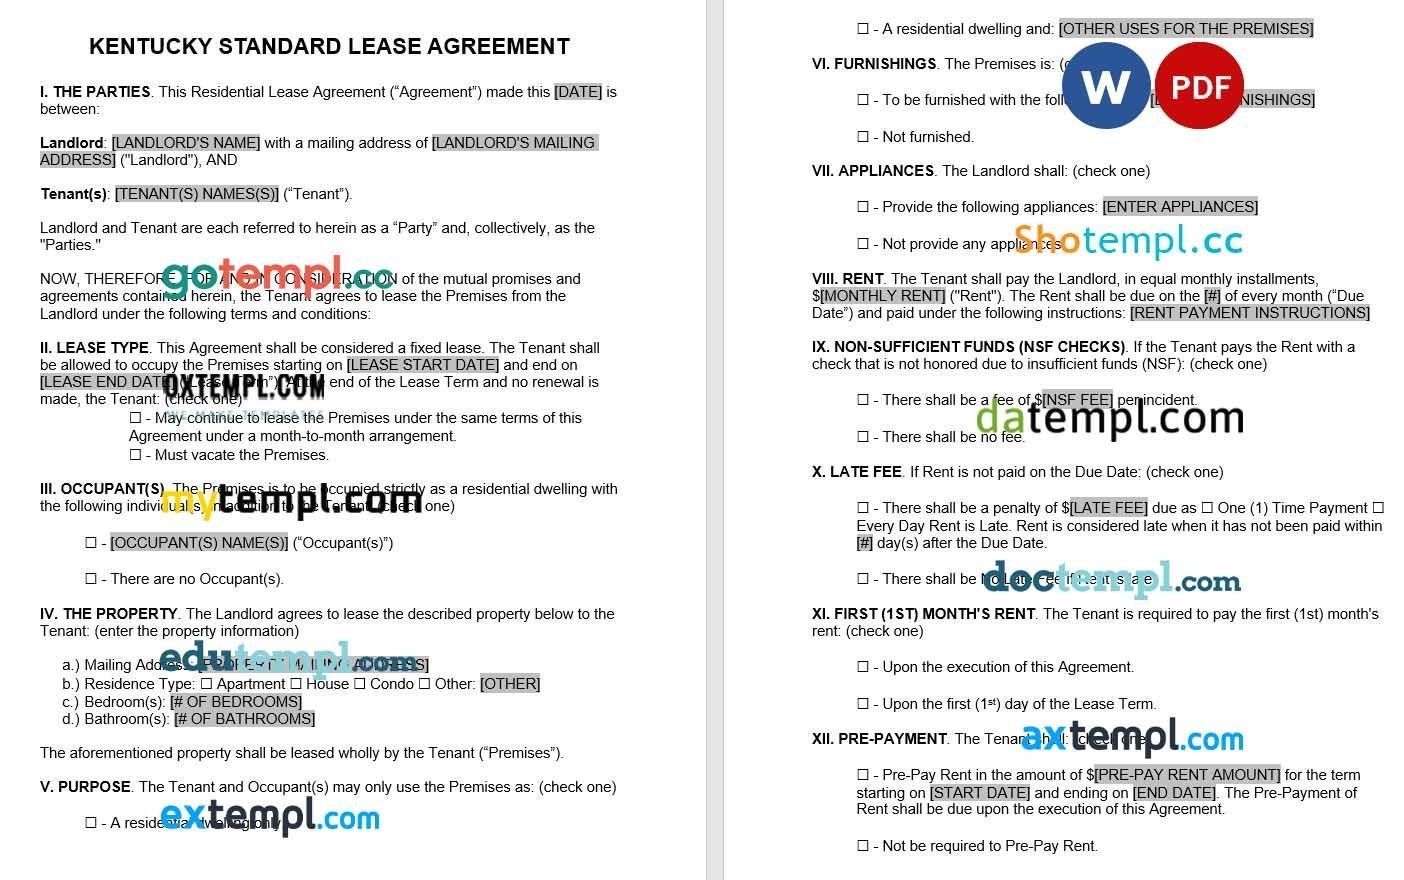 Kentucky Standard Residential Lease Agreement Word example, fully editable